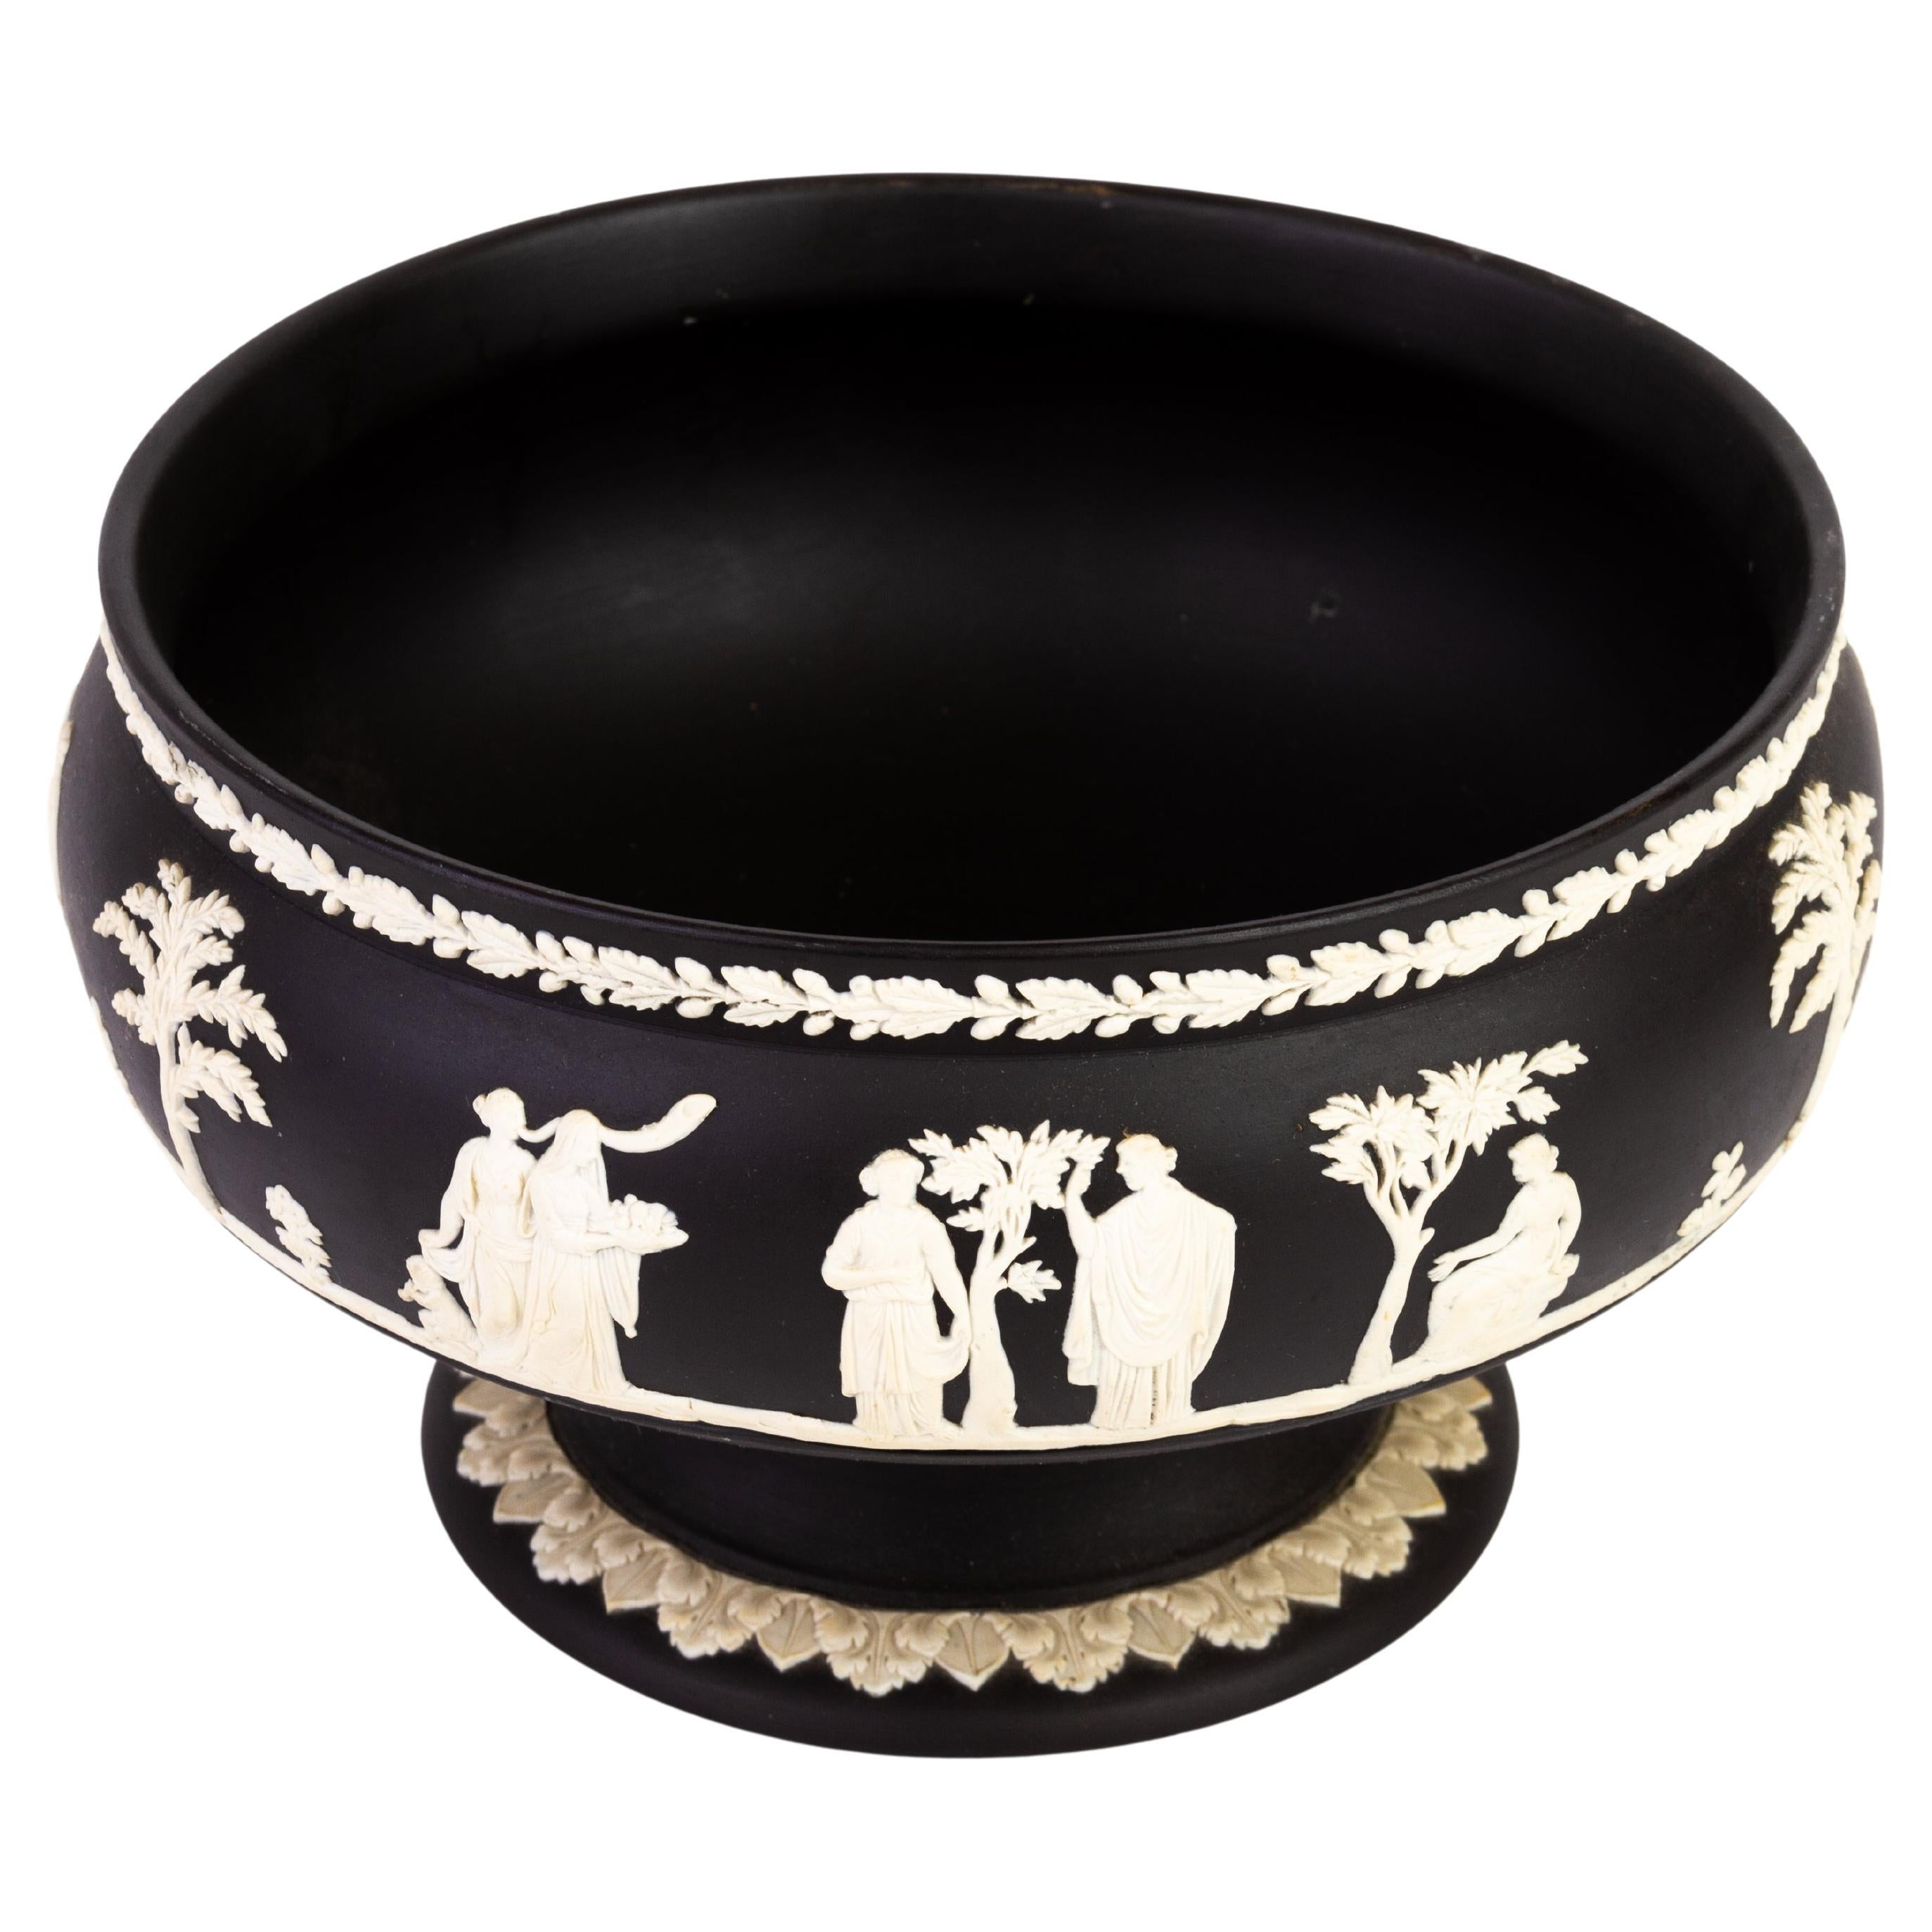 Wedgwood Black Basalt Neoclassical Comport Centrepiece For Sale